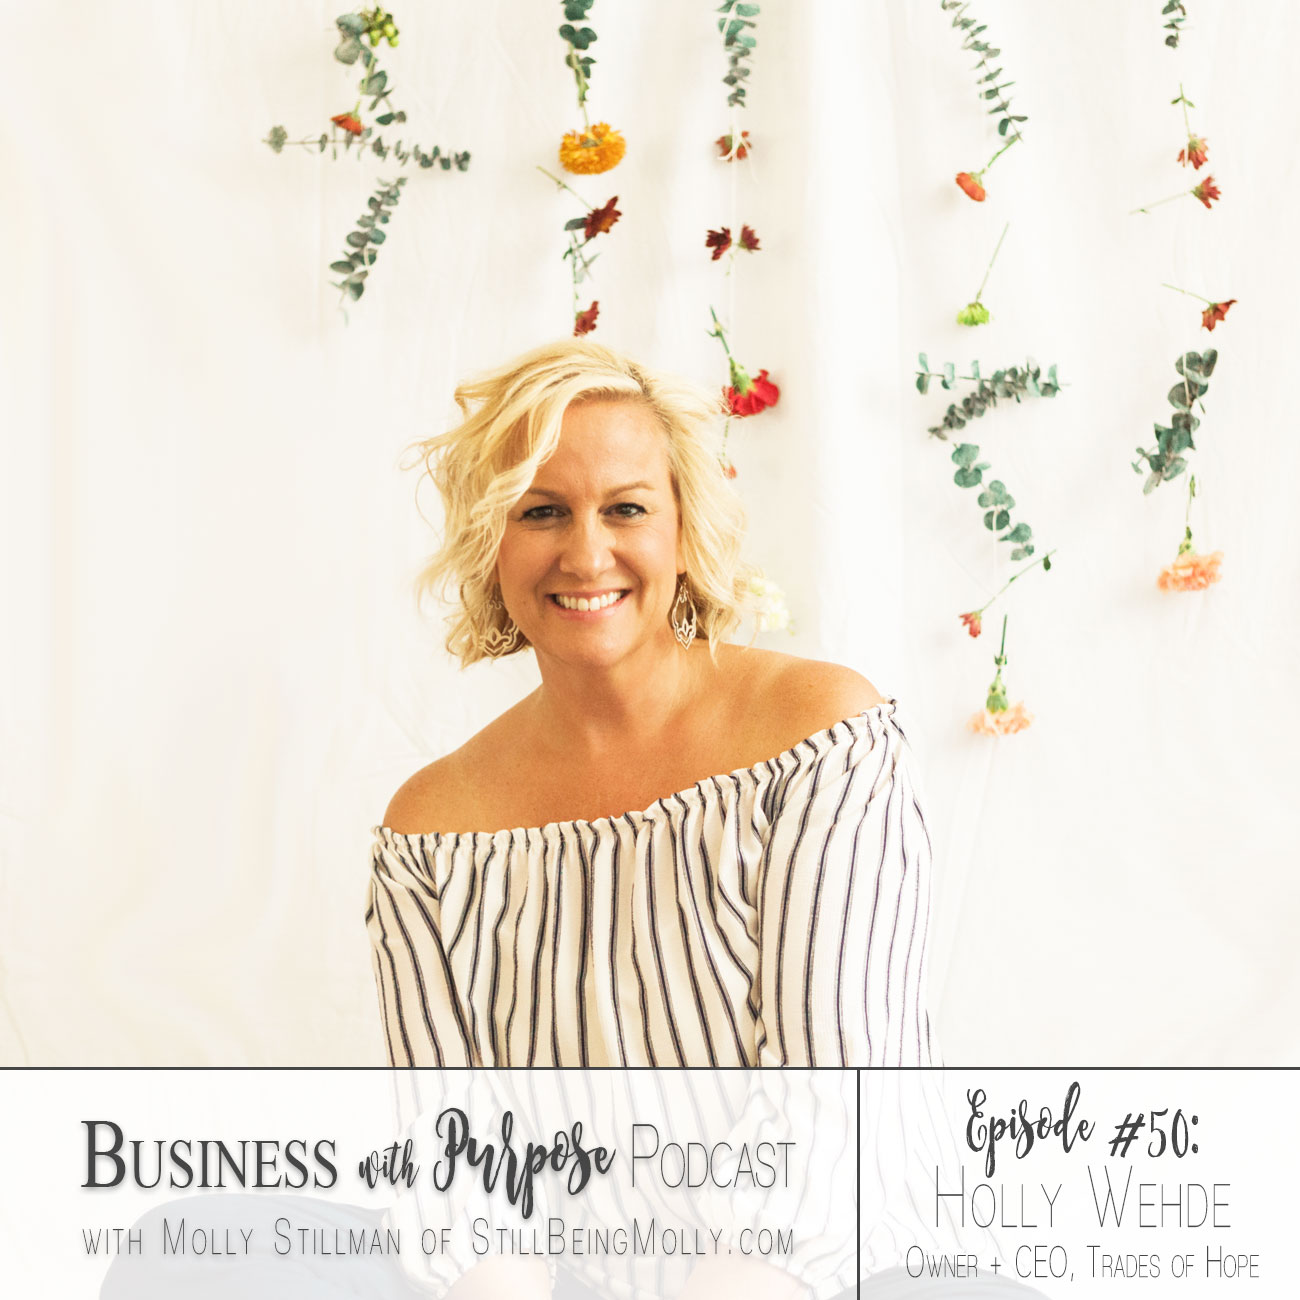 EP 50: Holly Wehde, Owner & CEO of Trades of Hope